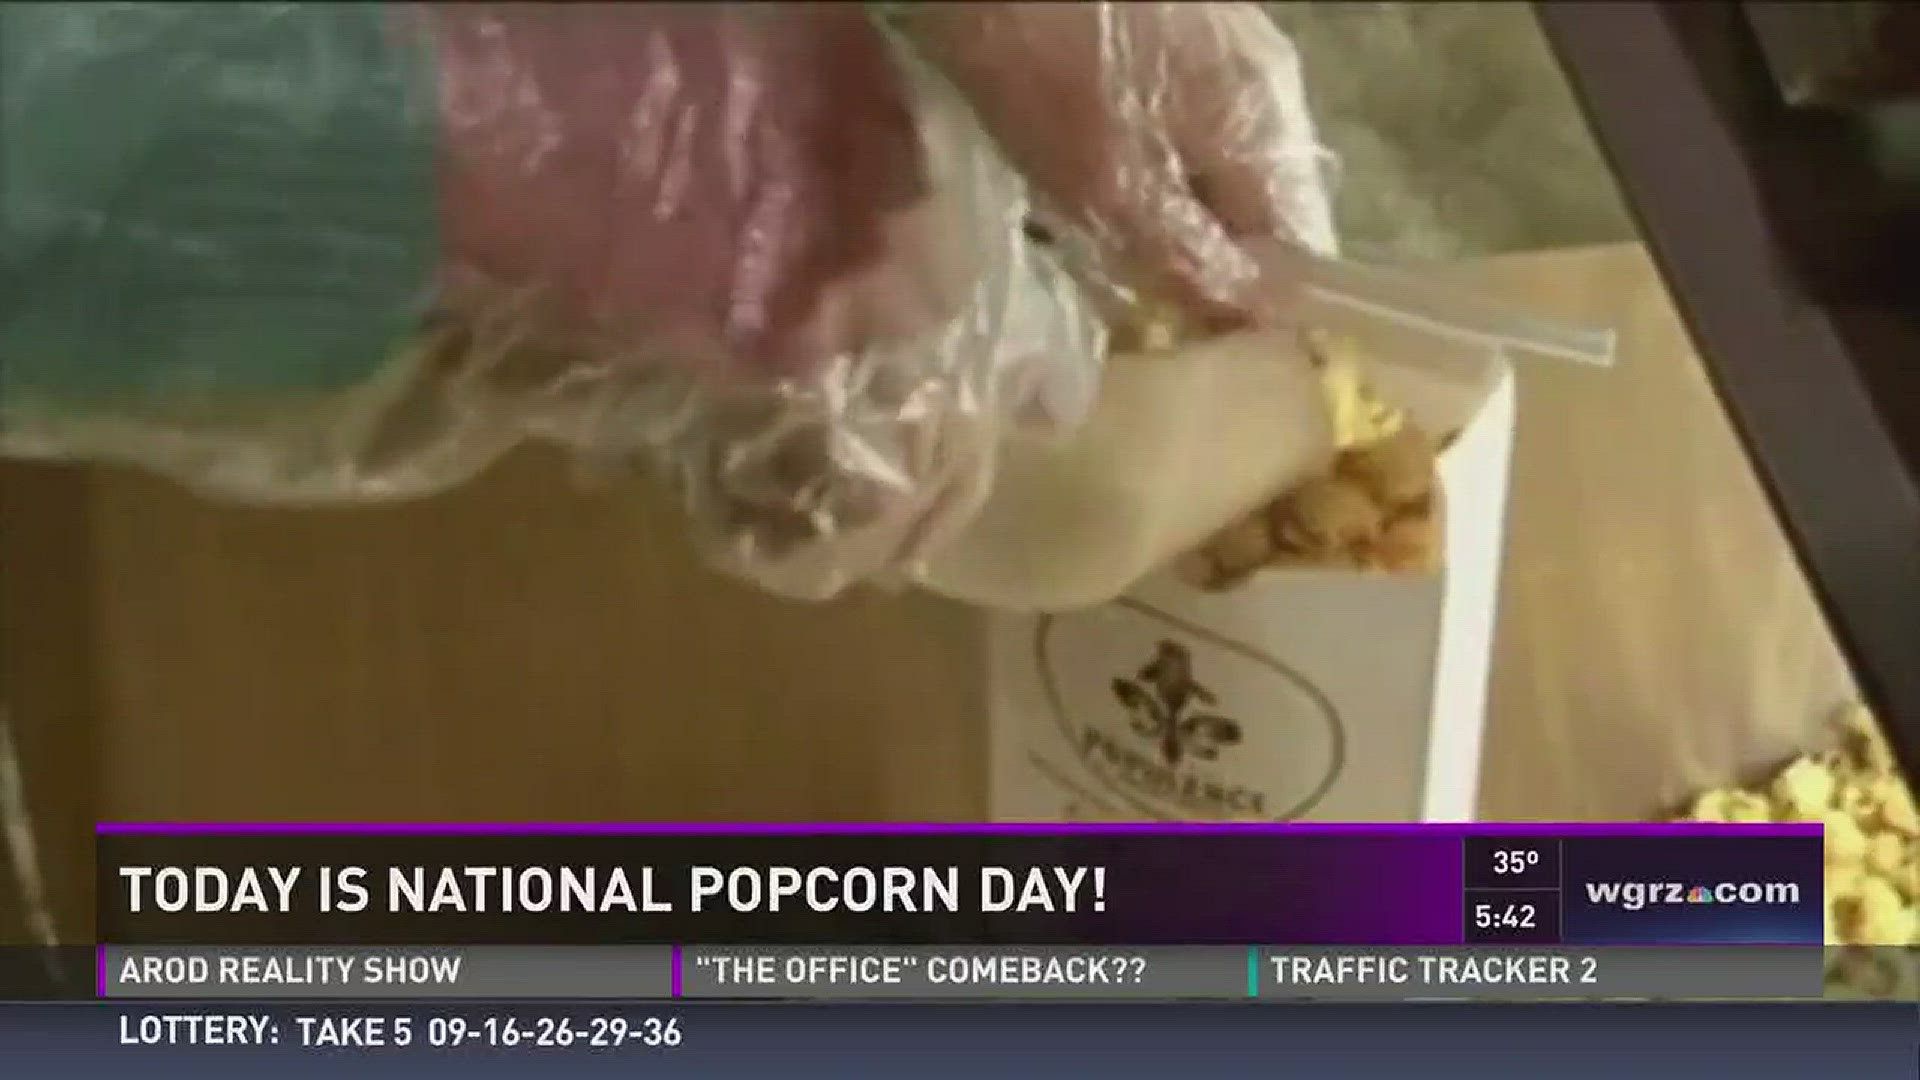 Thursday, January 19th is National Popcorn Day. All popcorn is half off at Regal Cinemas.